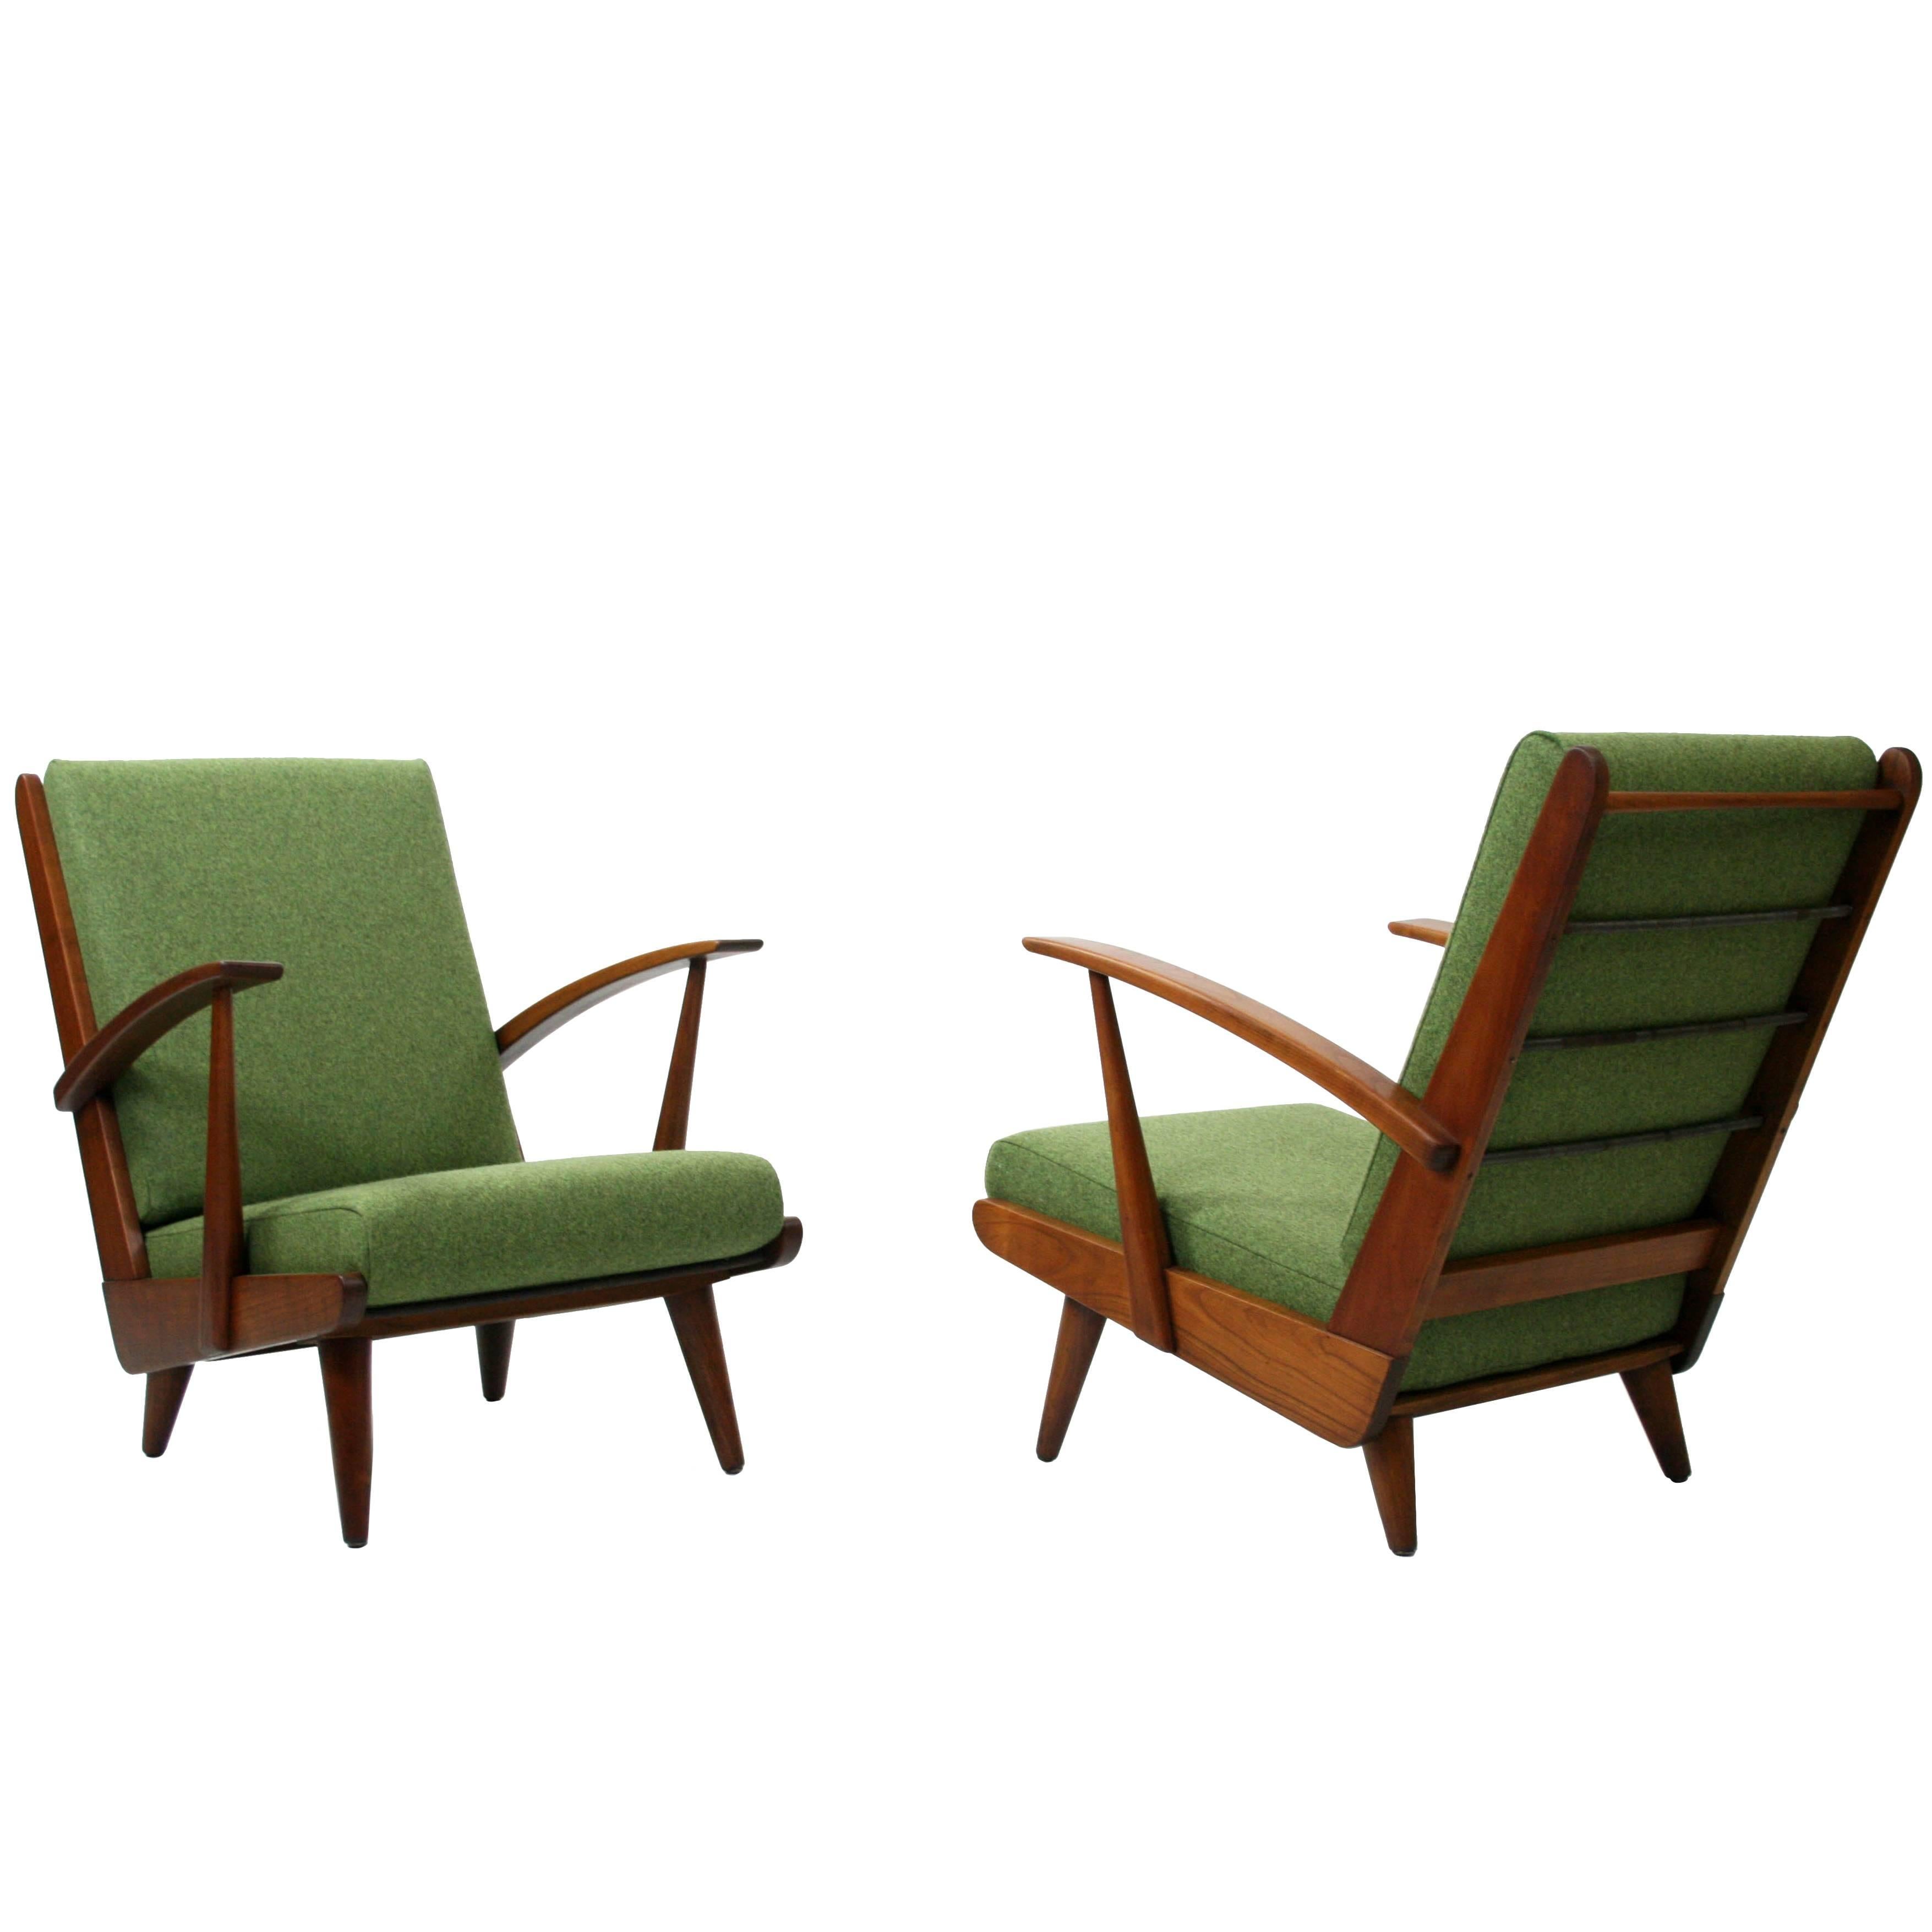 Fantastic Pair of Early 1940s Scandinavian Lounge Chairs